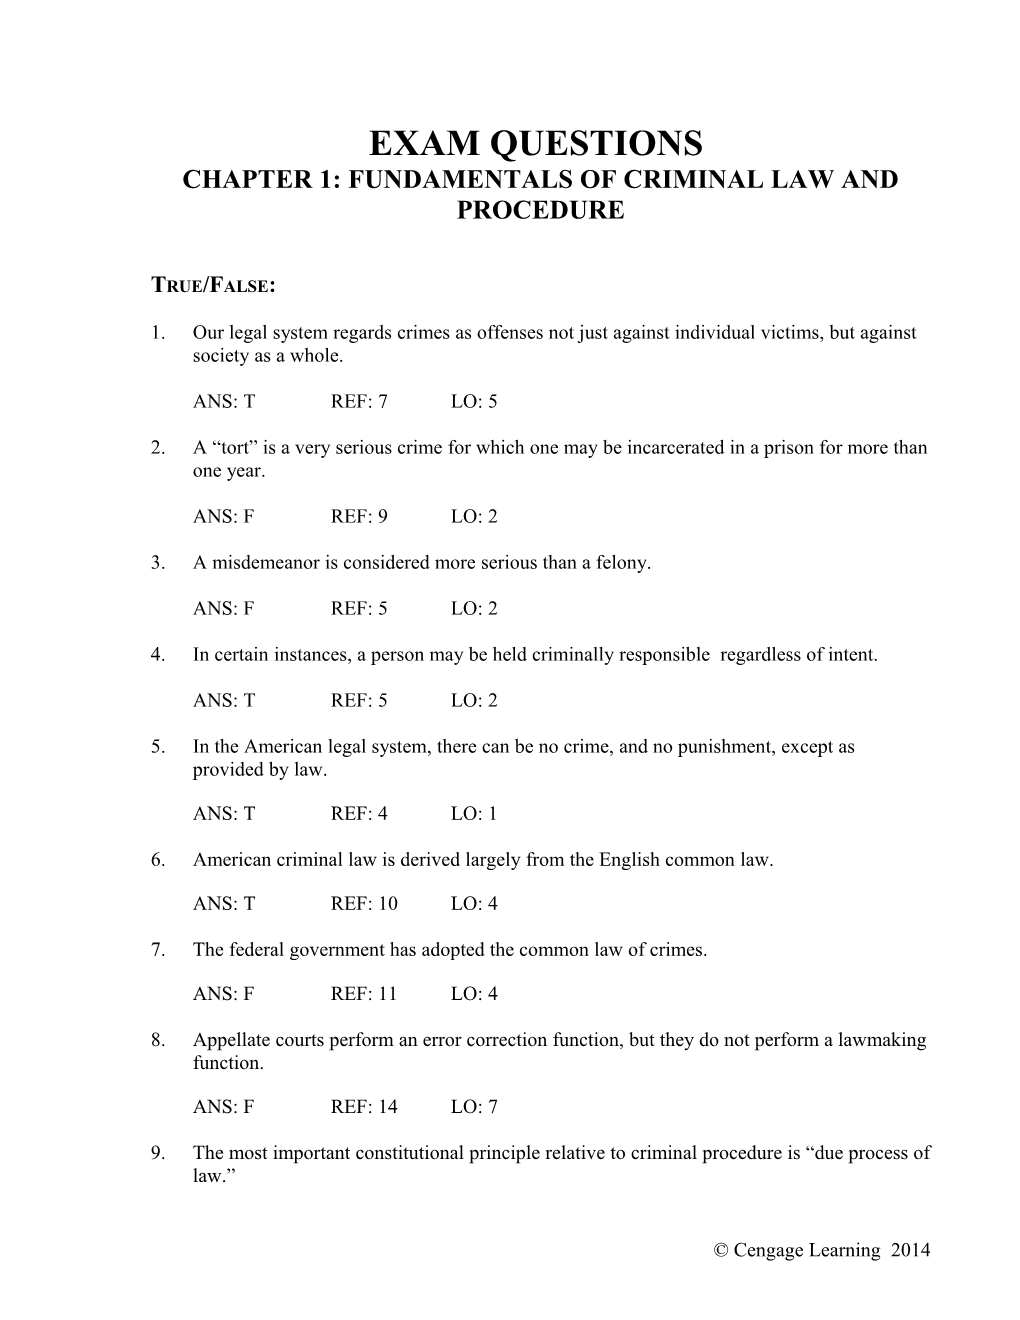 Chapter 1: FUNDAMENTALS of CRIMINAL LAW and PROCEDURE